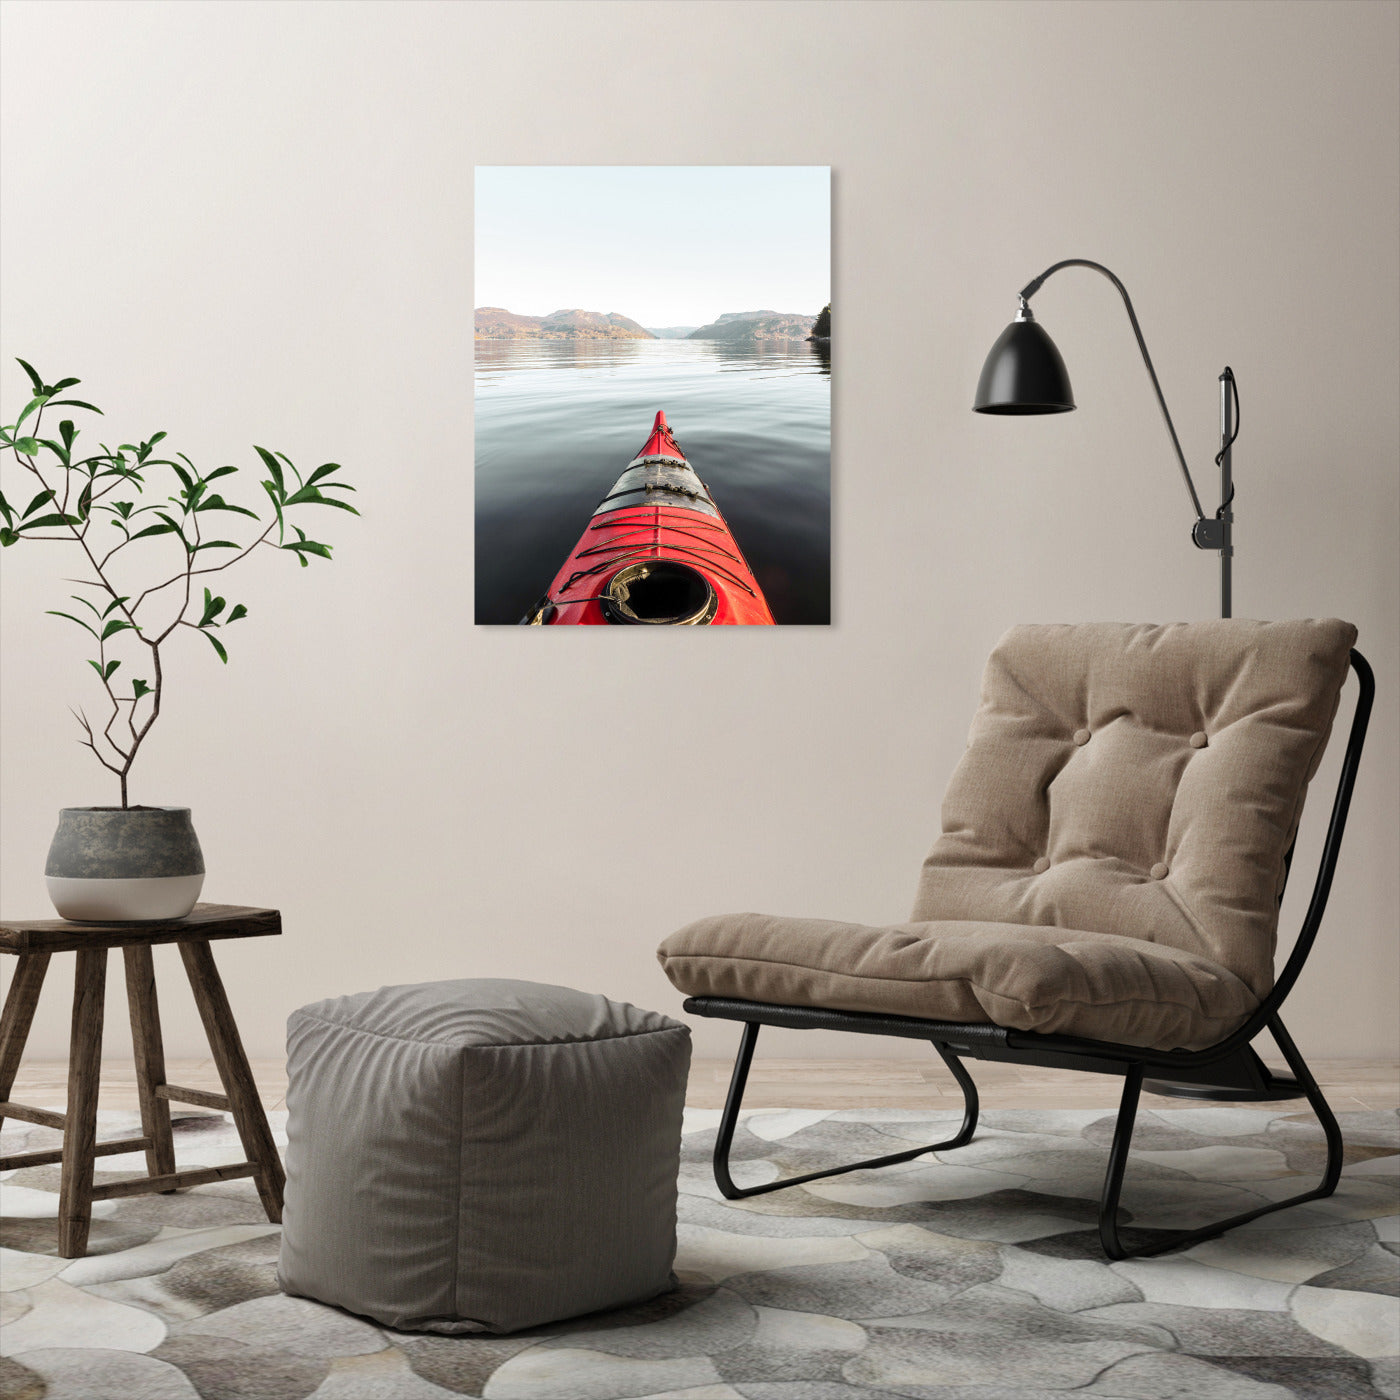 The Red Kayak In Norway by Henrike Schenk - Wrapped Canvas